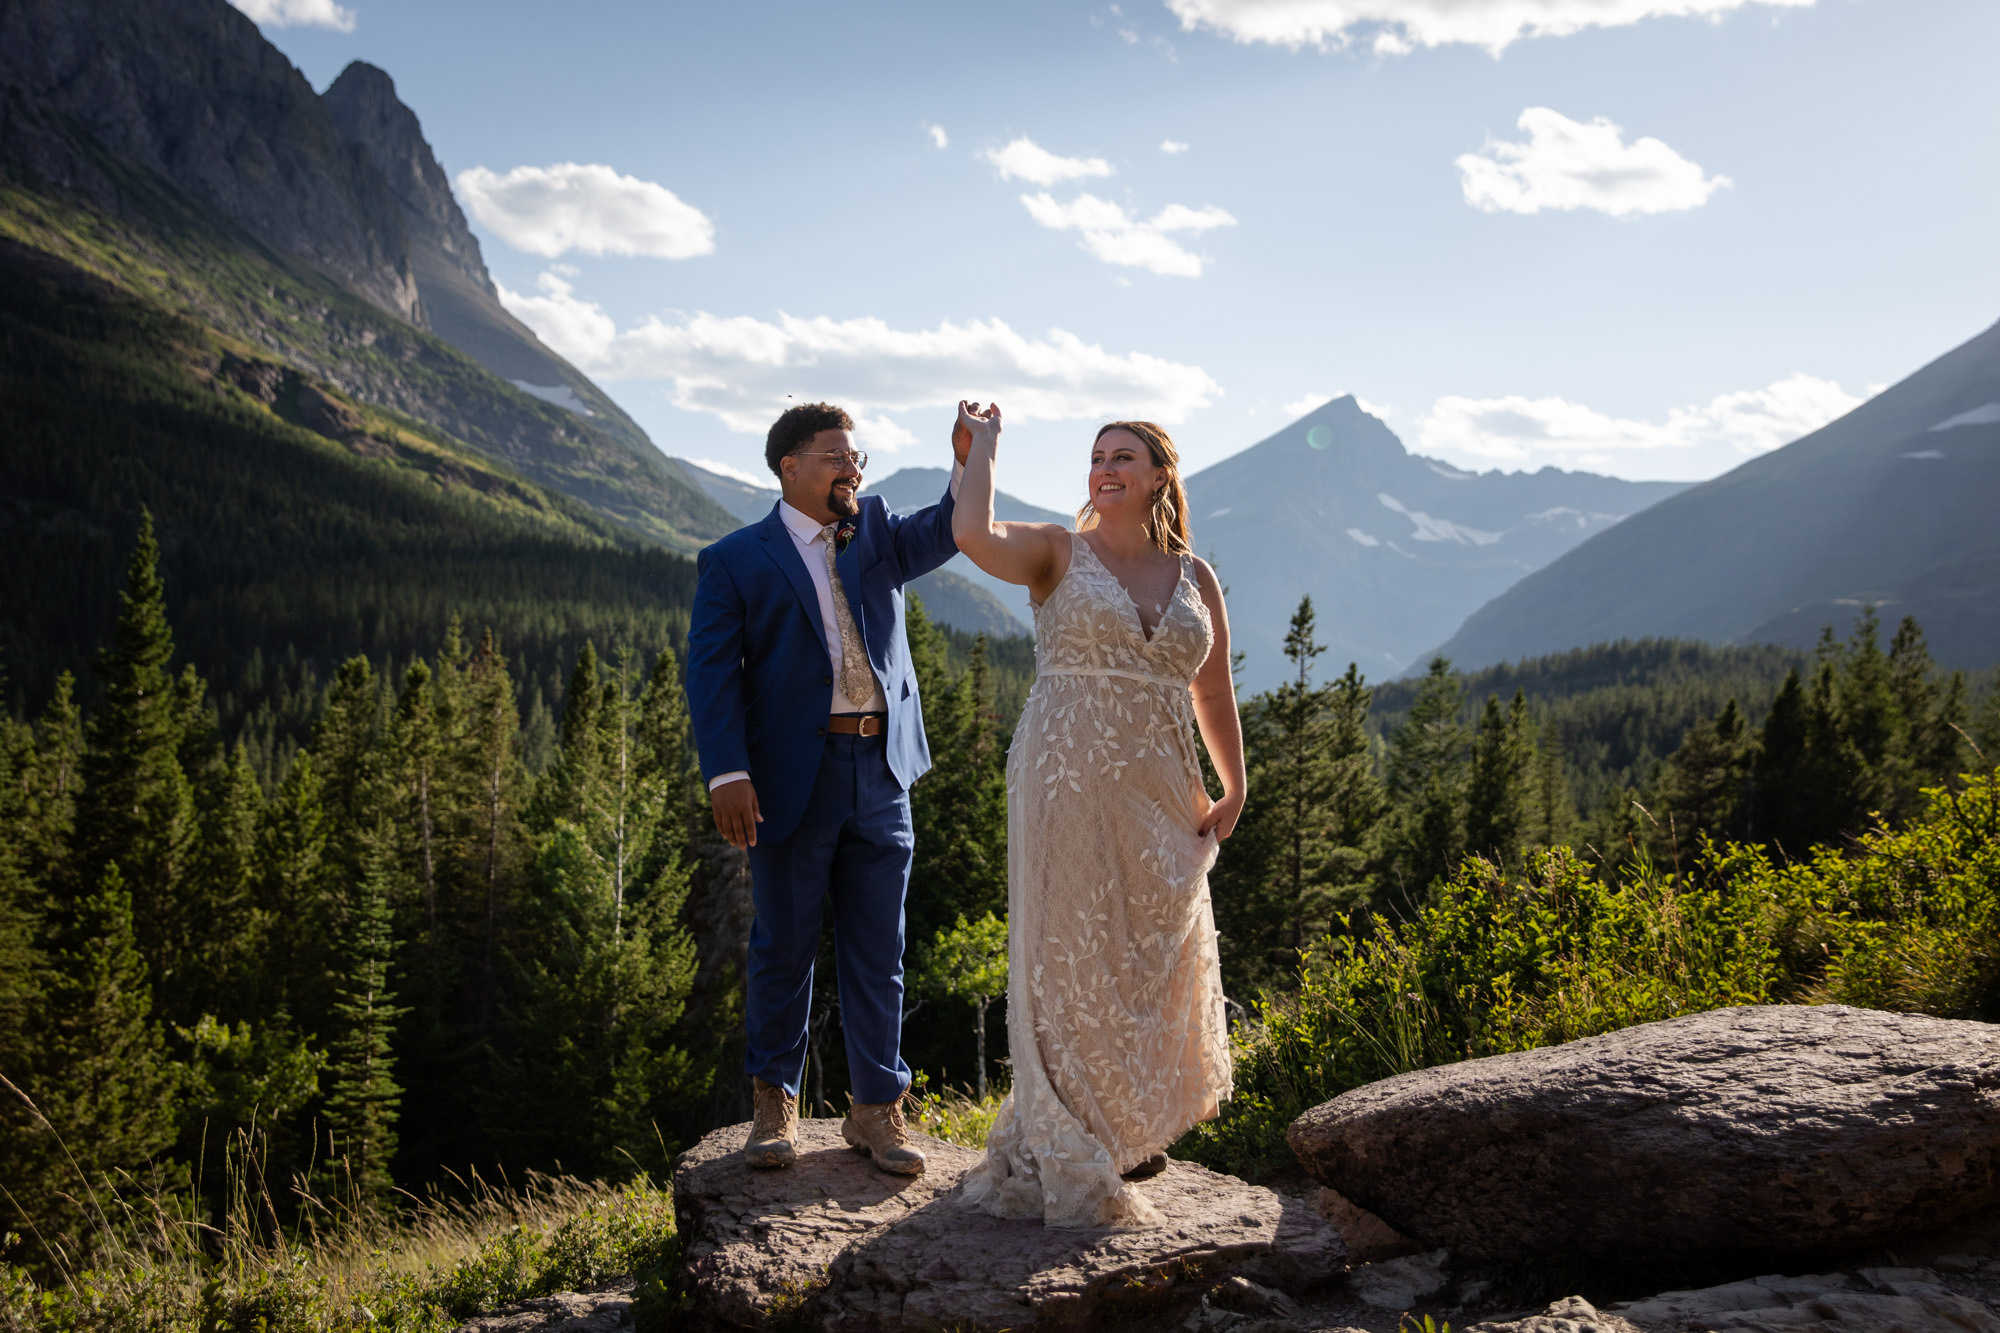 A bride and groom dance on a rock after eloping in Glacier national park.